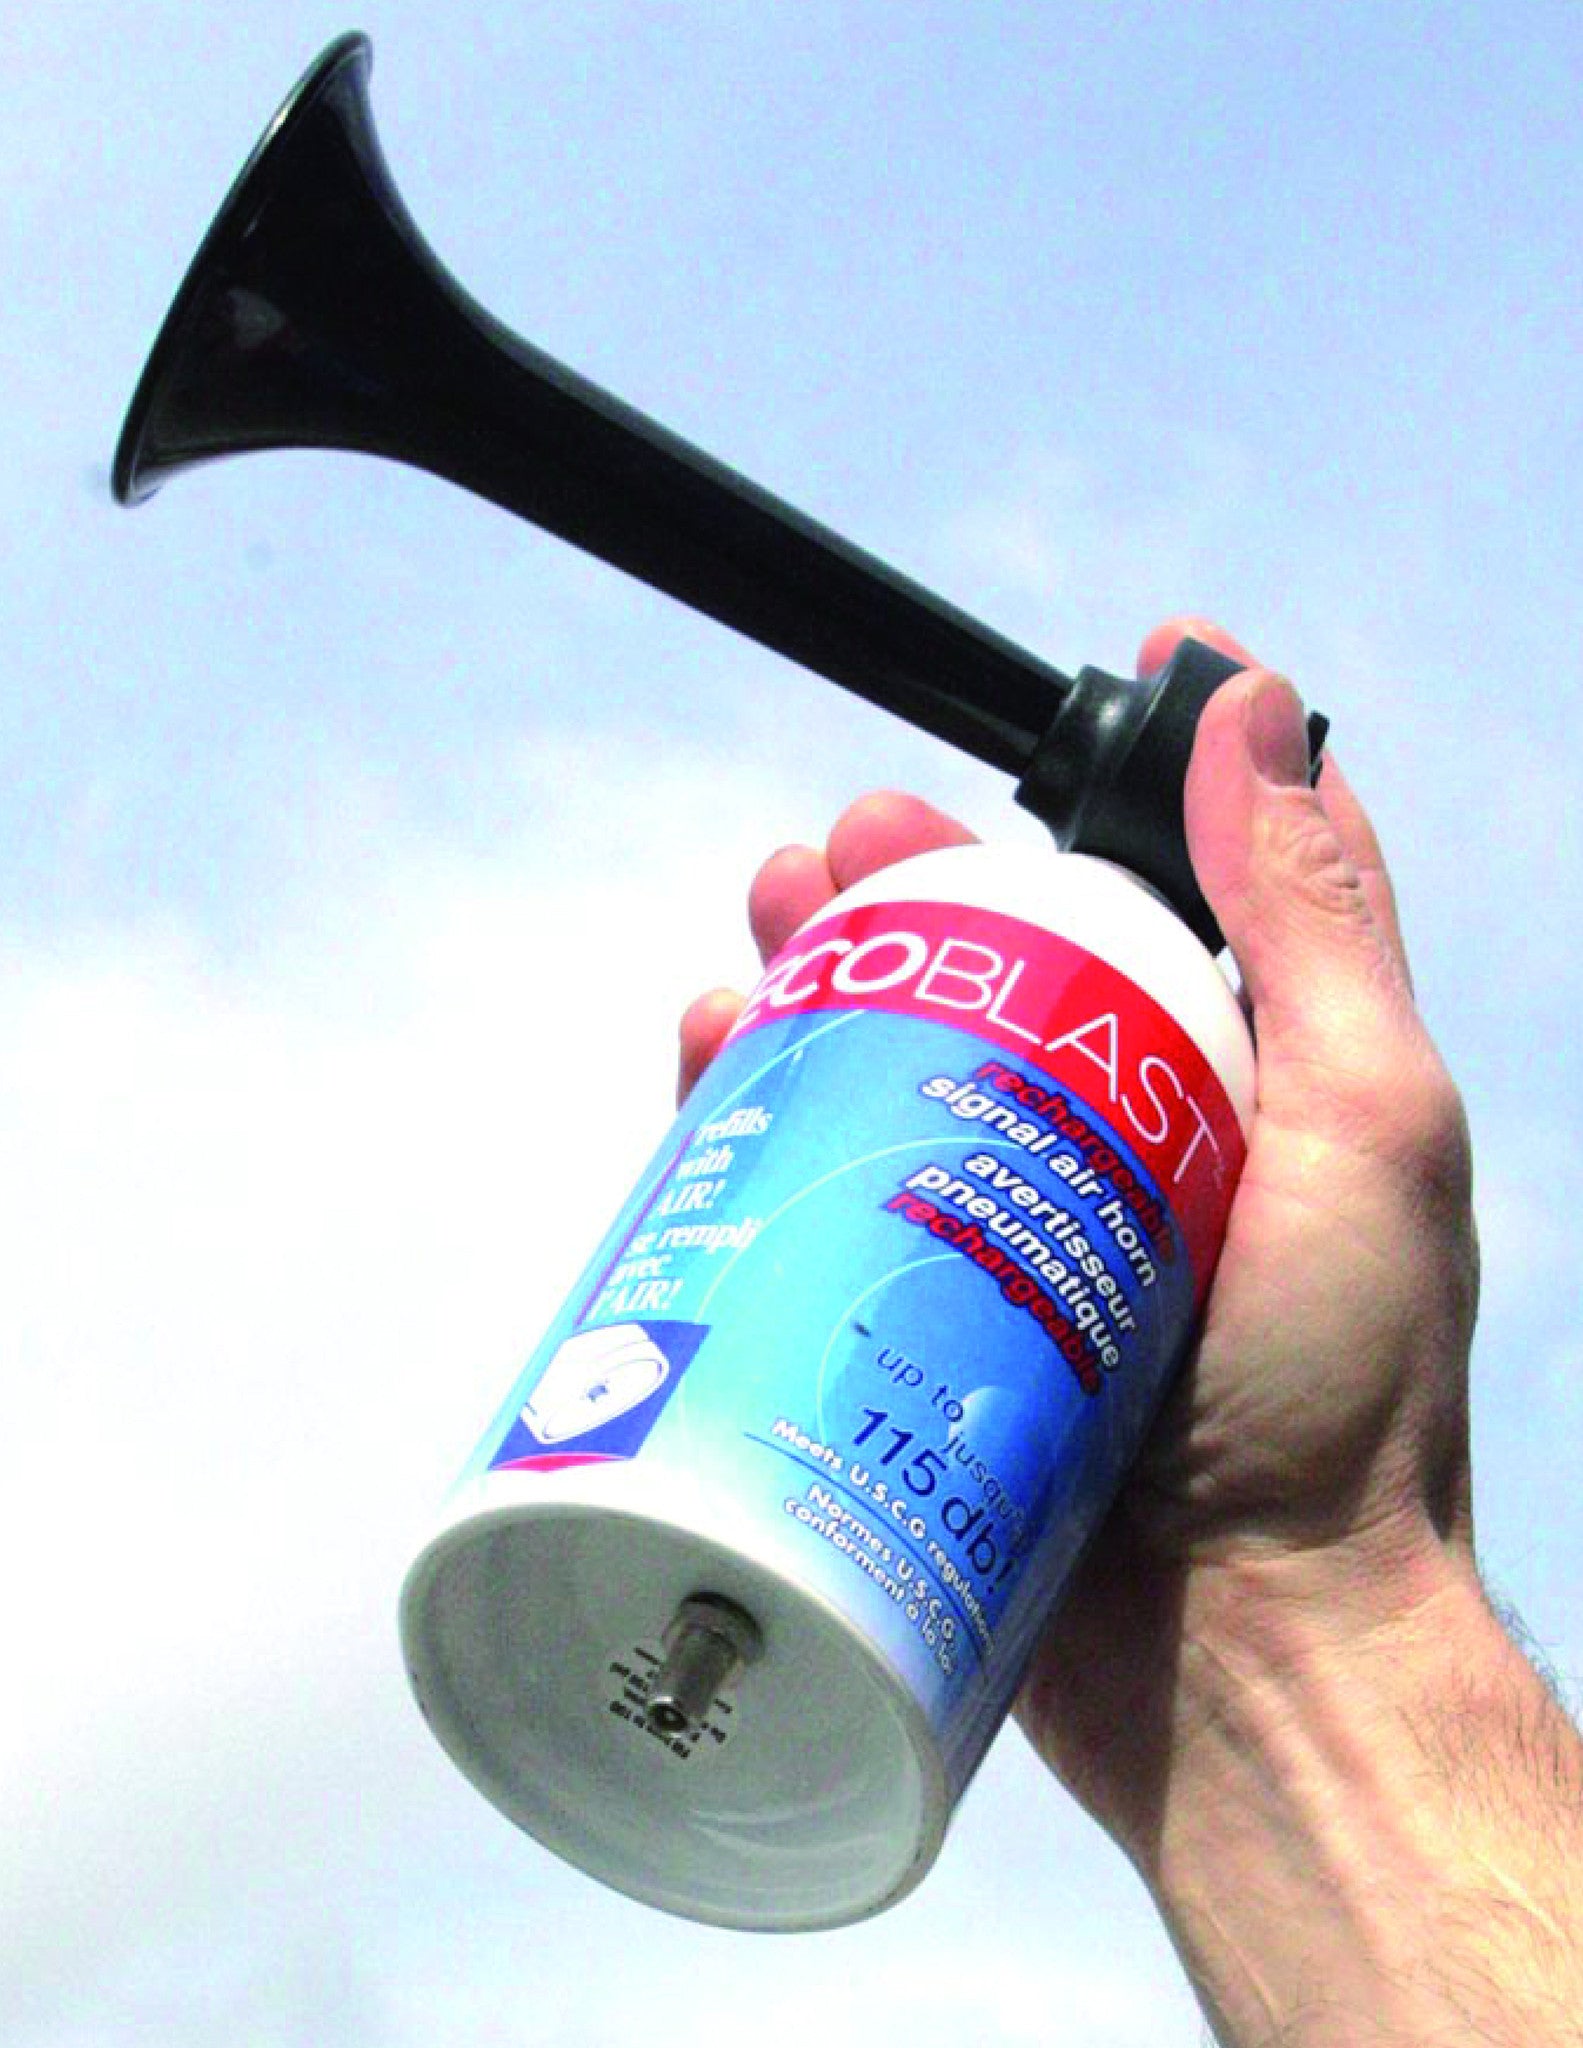 Ecoblast Air Horn & Pump - In. Stock - The Wetworks